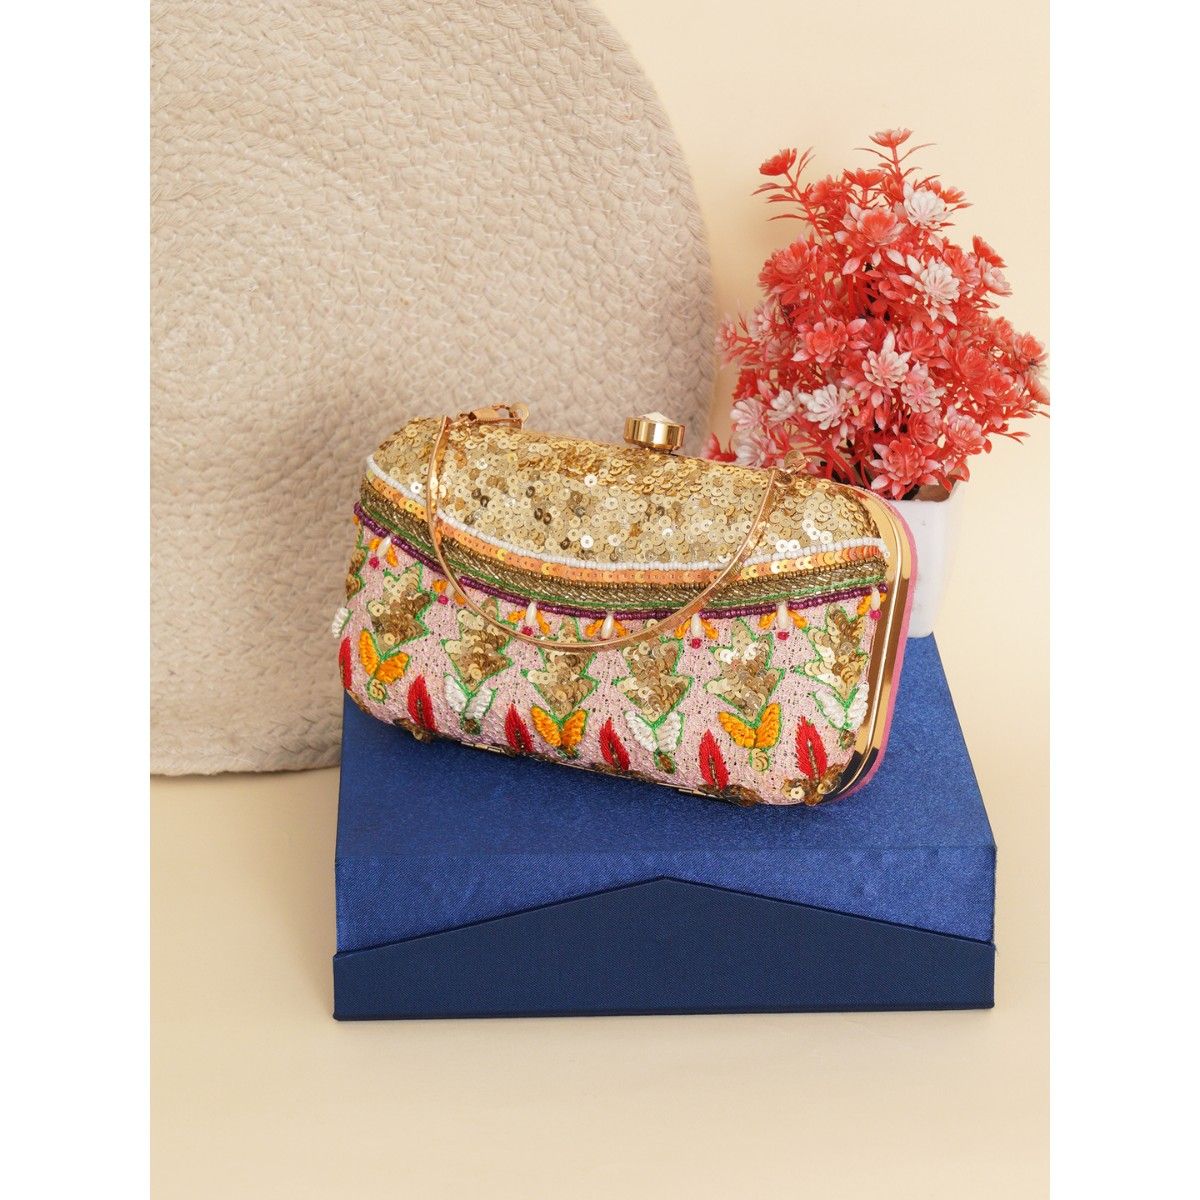 Hand Ribbon Embroidery Small Zip Clutch Bag Burlap Card Pouch Christmas  Gift Clutch Bags Women Coin Purse Party Favors Bunk Fabric Tassel Clutch Bag  From Chinasilkcrafts, $26.39 | DHgate.Com